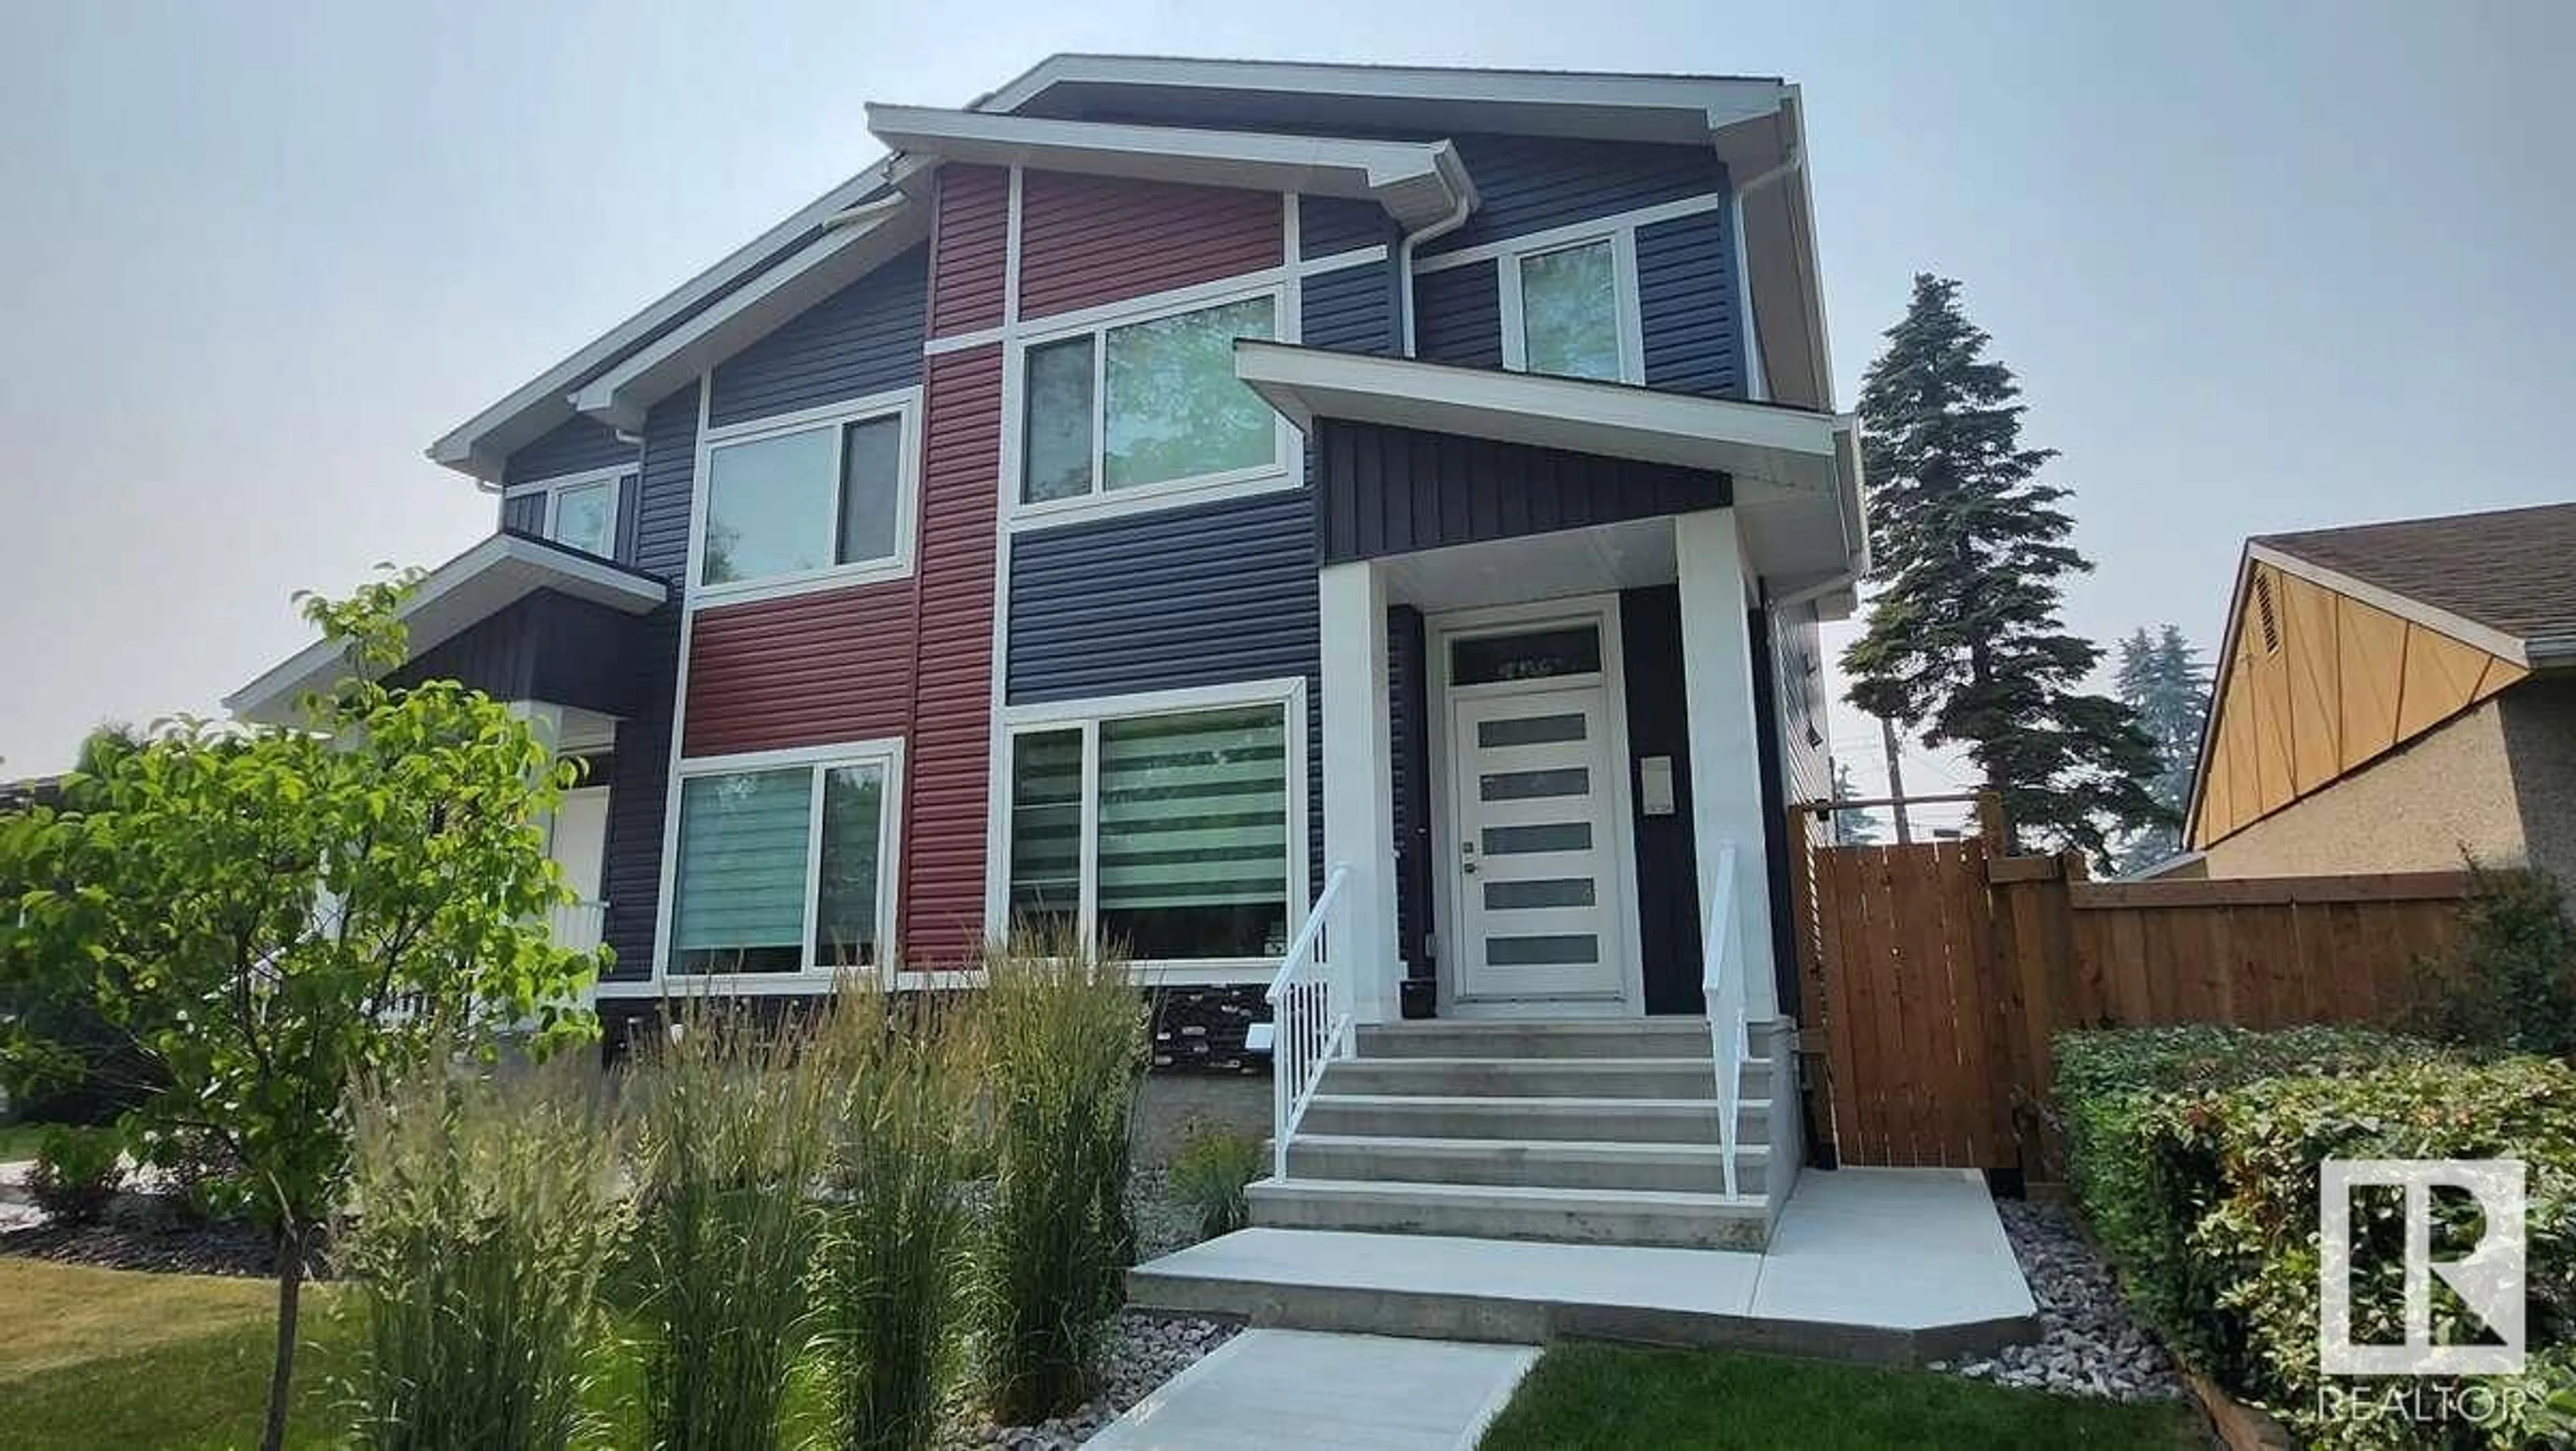 A pic from exterior of the house or condo for 13026 120 ST NW, Edmonton Alberta T5E5N9